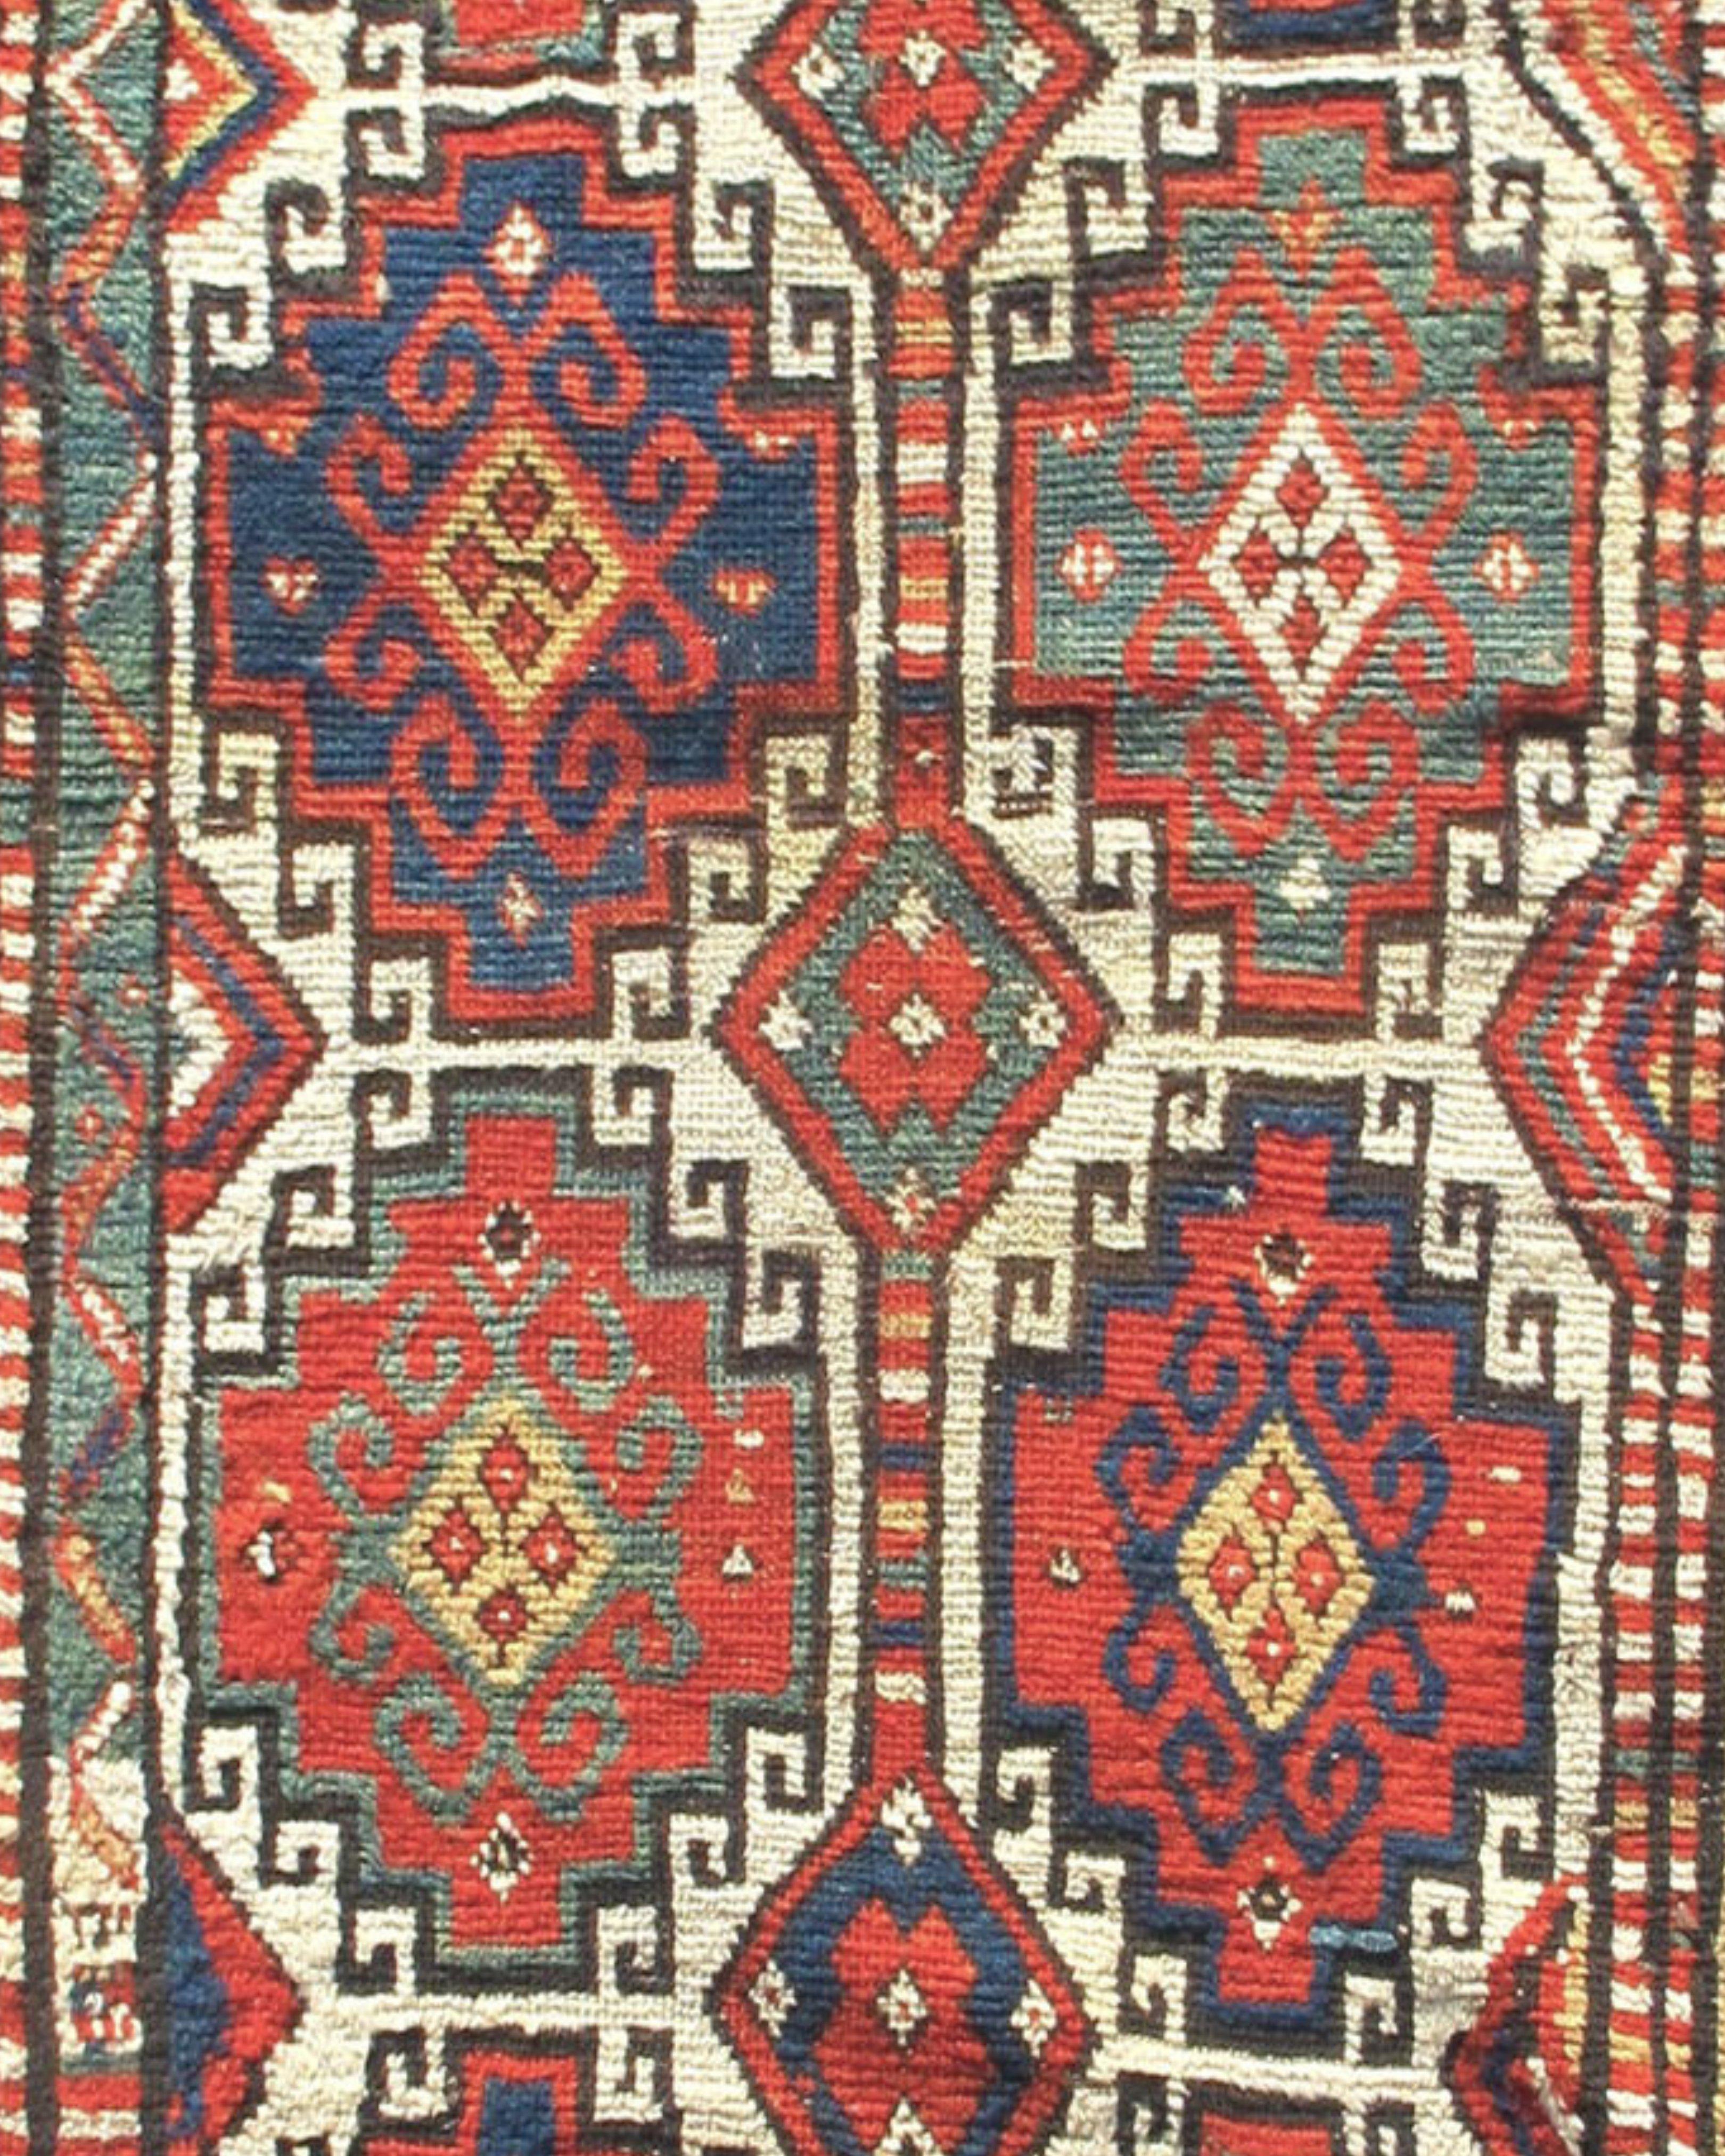 Antique Moghan Rug, Late 19th Century

Additional Information:
Dimensions: 3'2